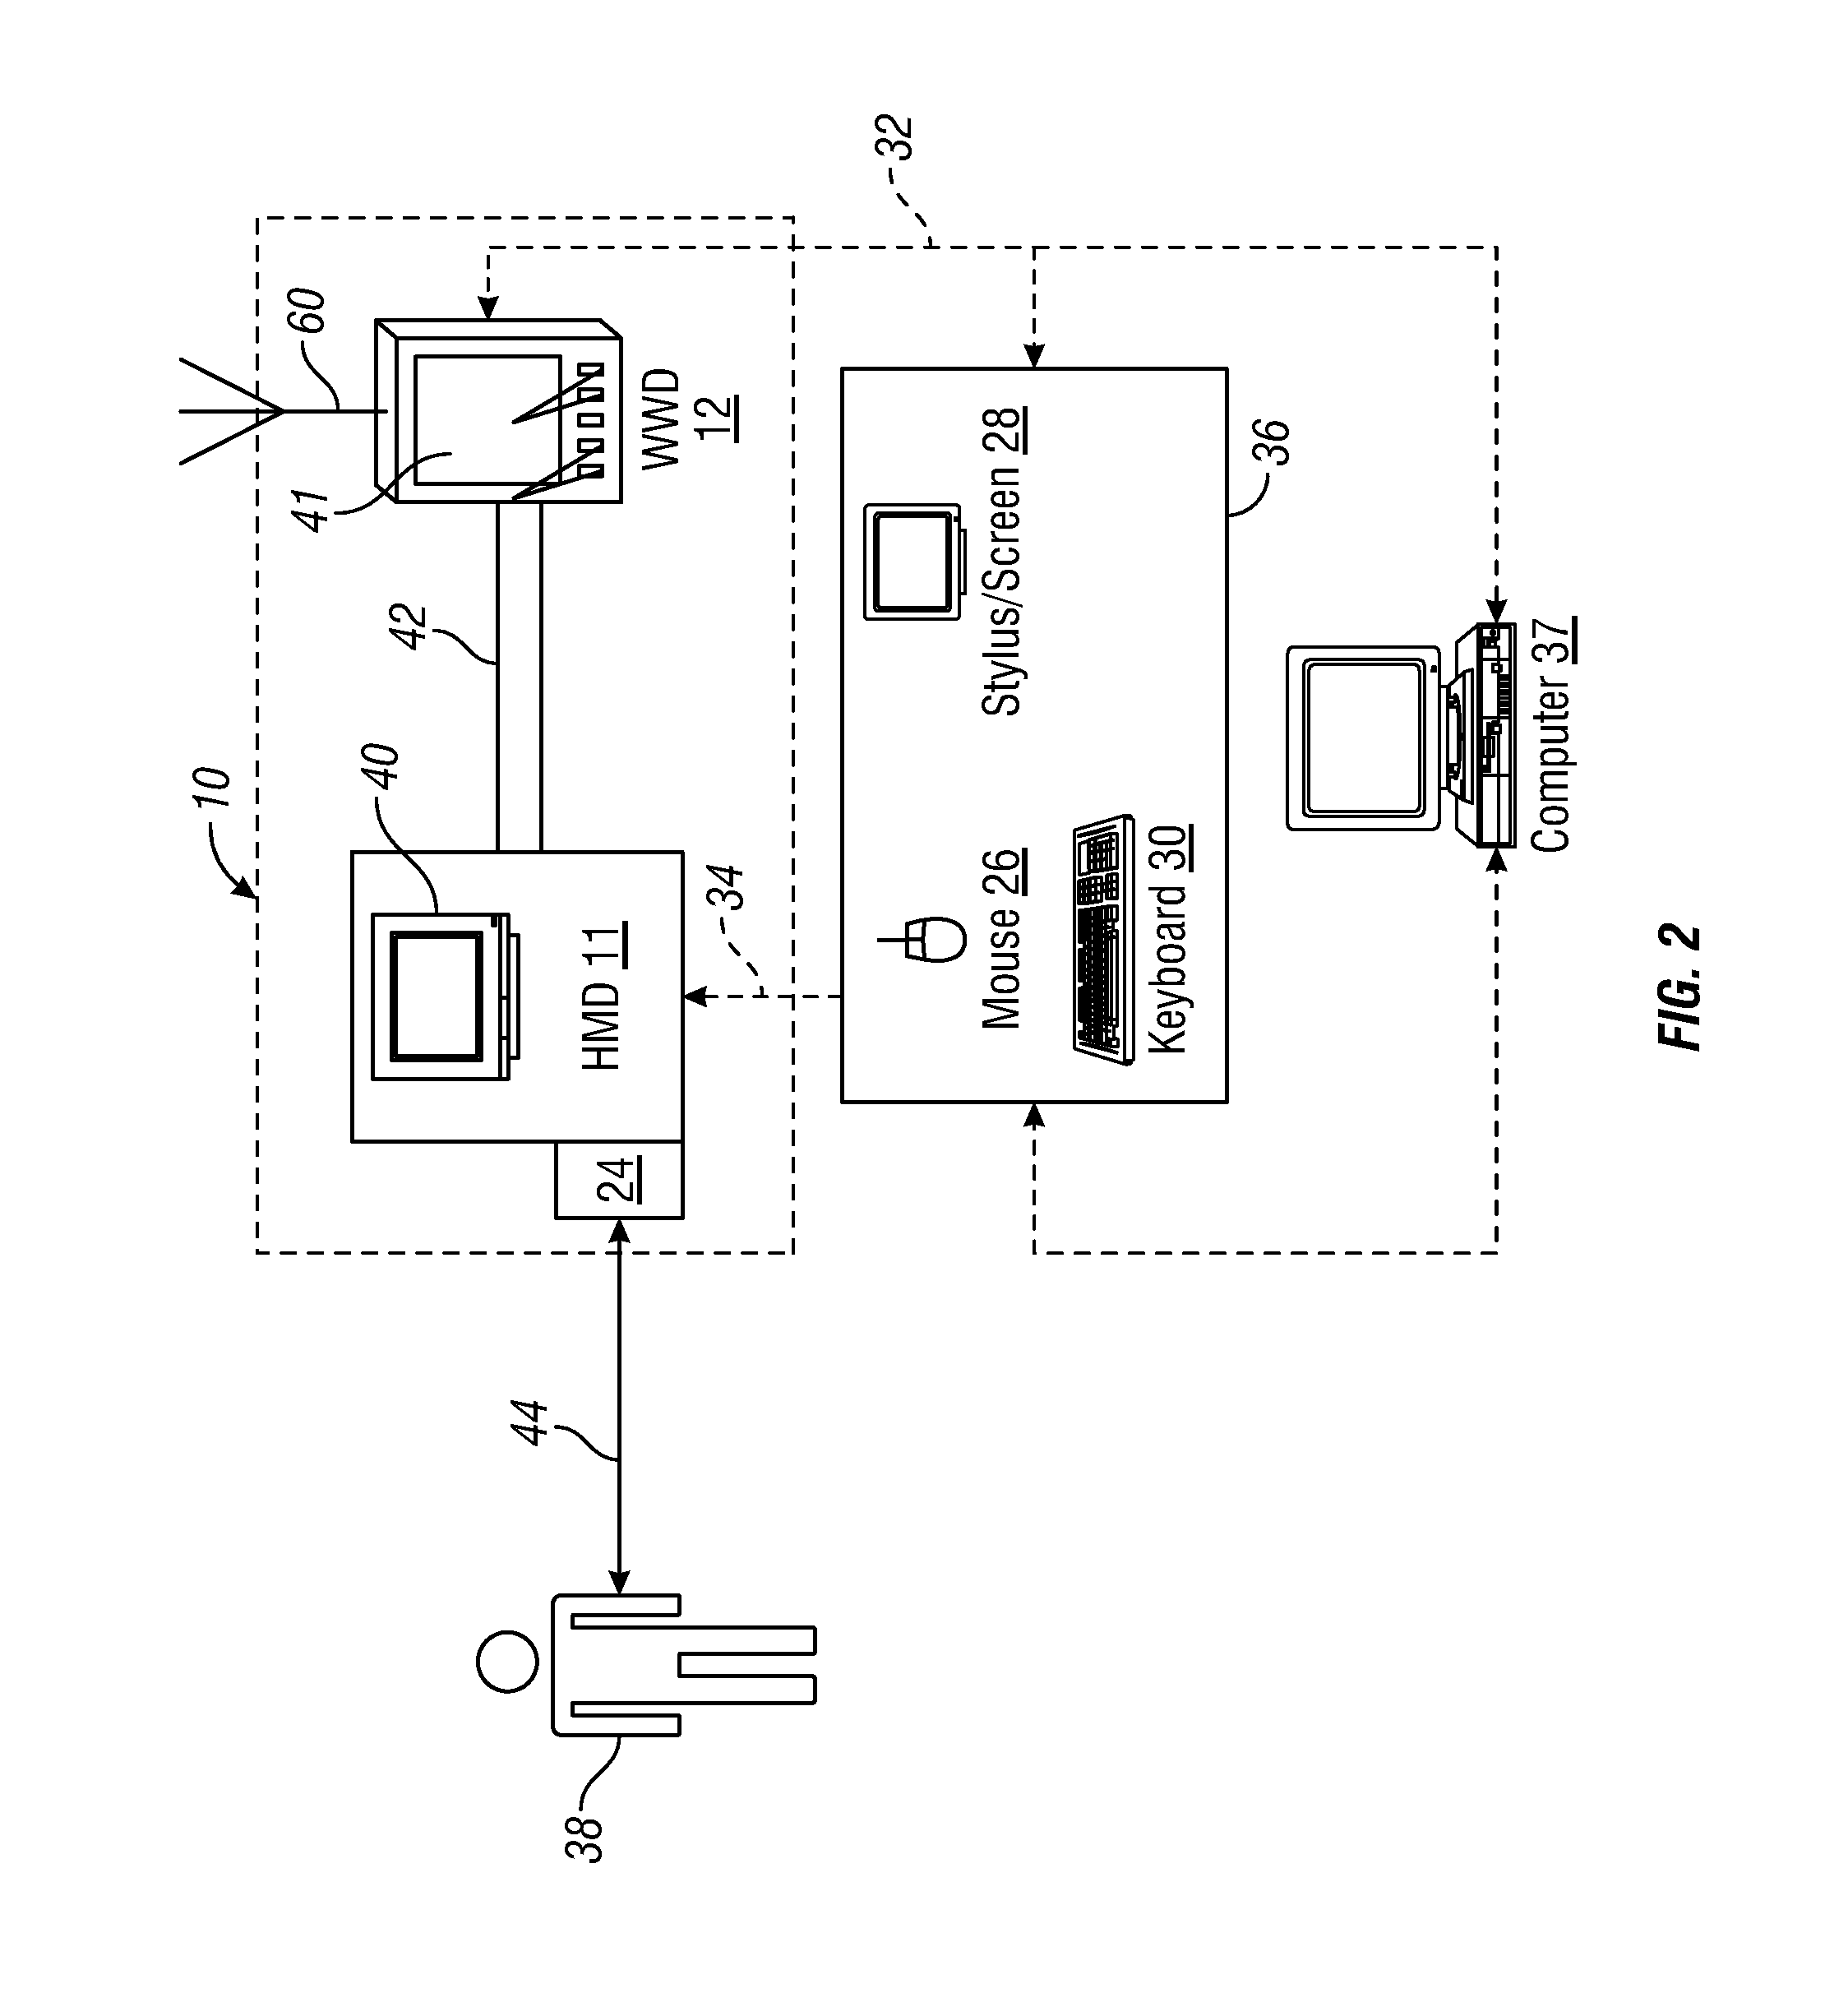 Method and apparatus for monitoring exercise with wireless internet connectivity